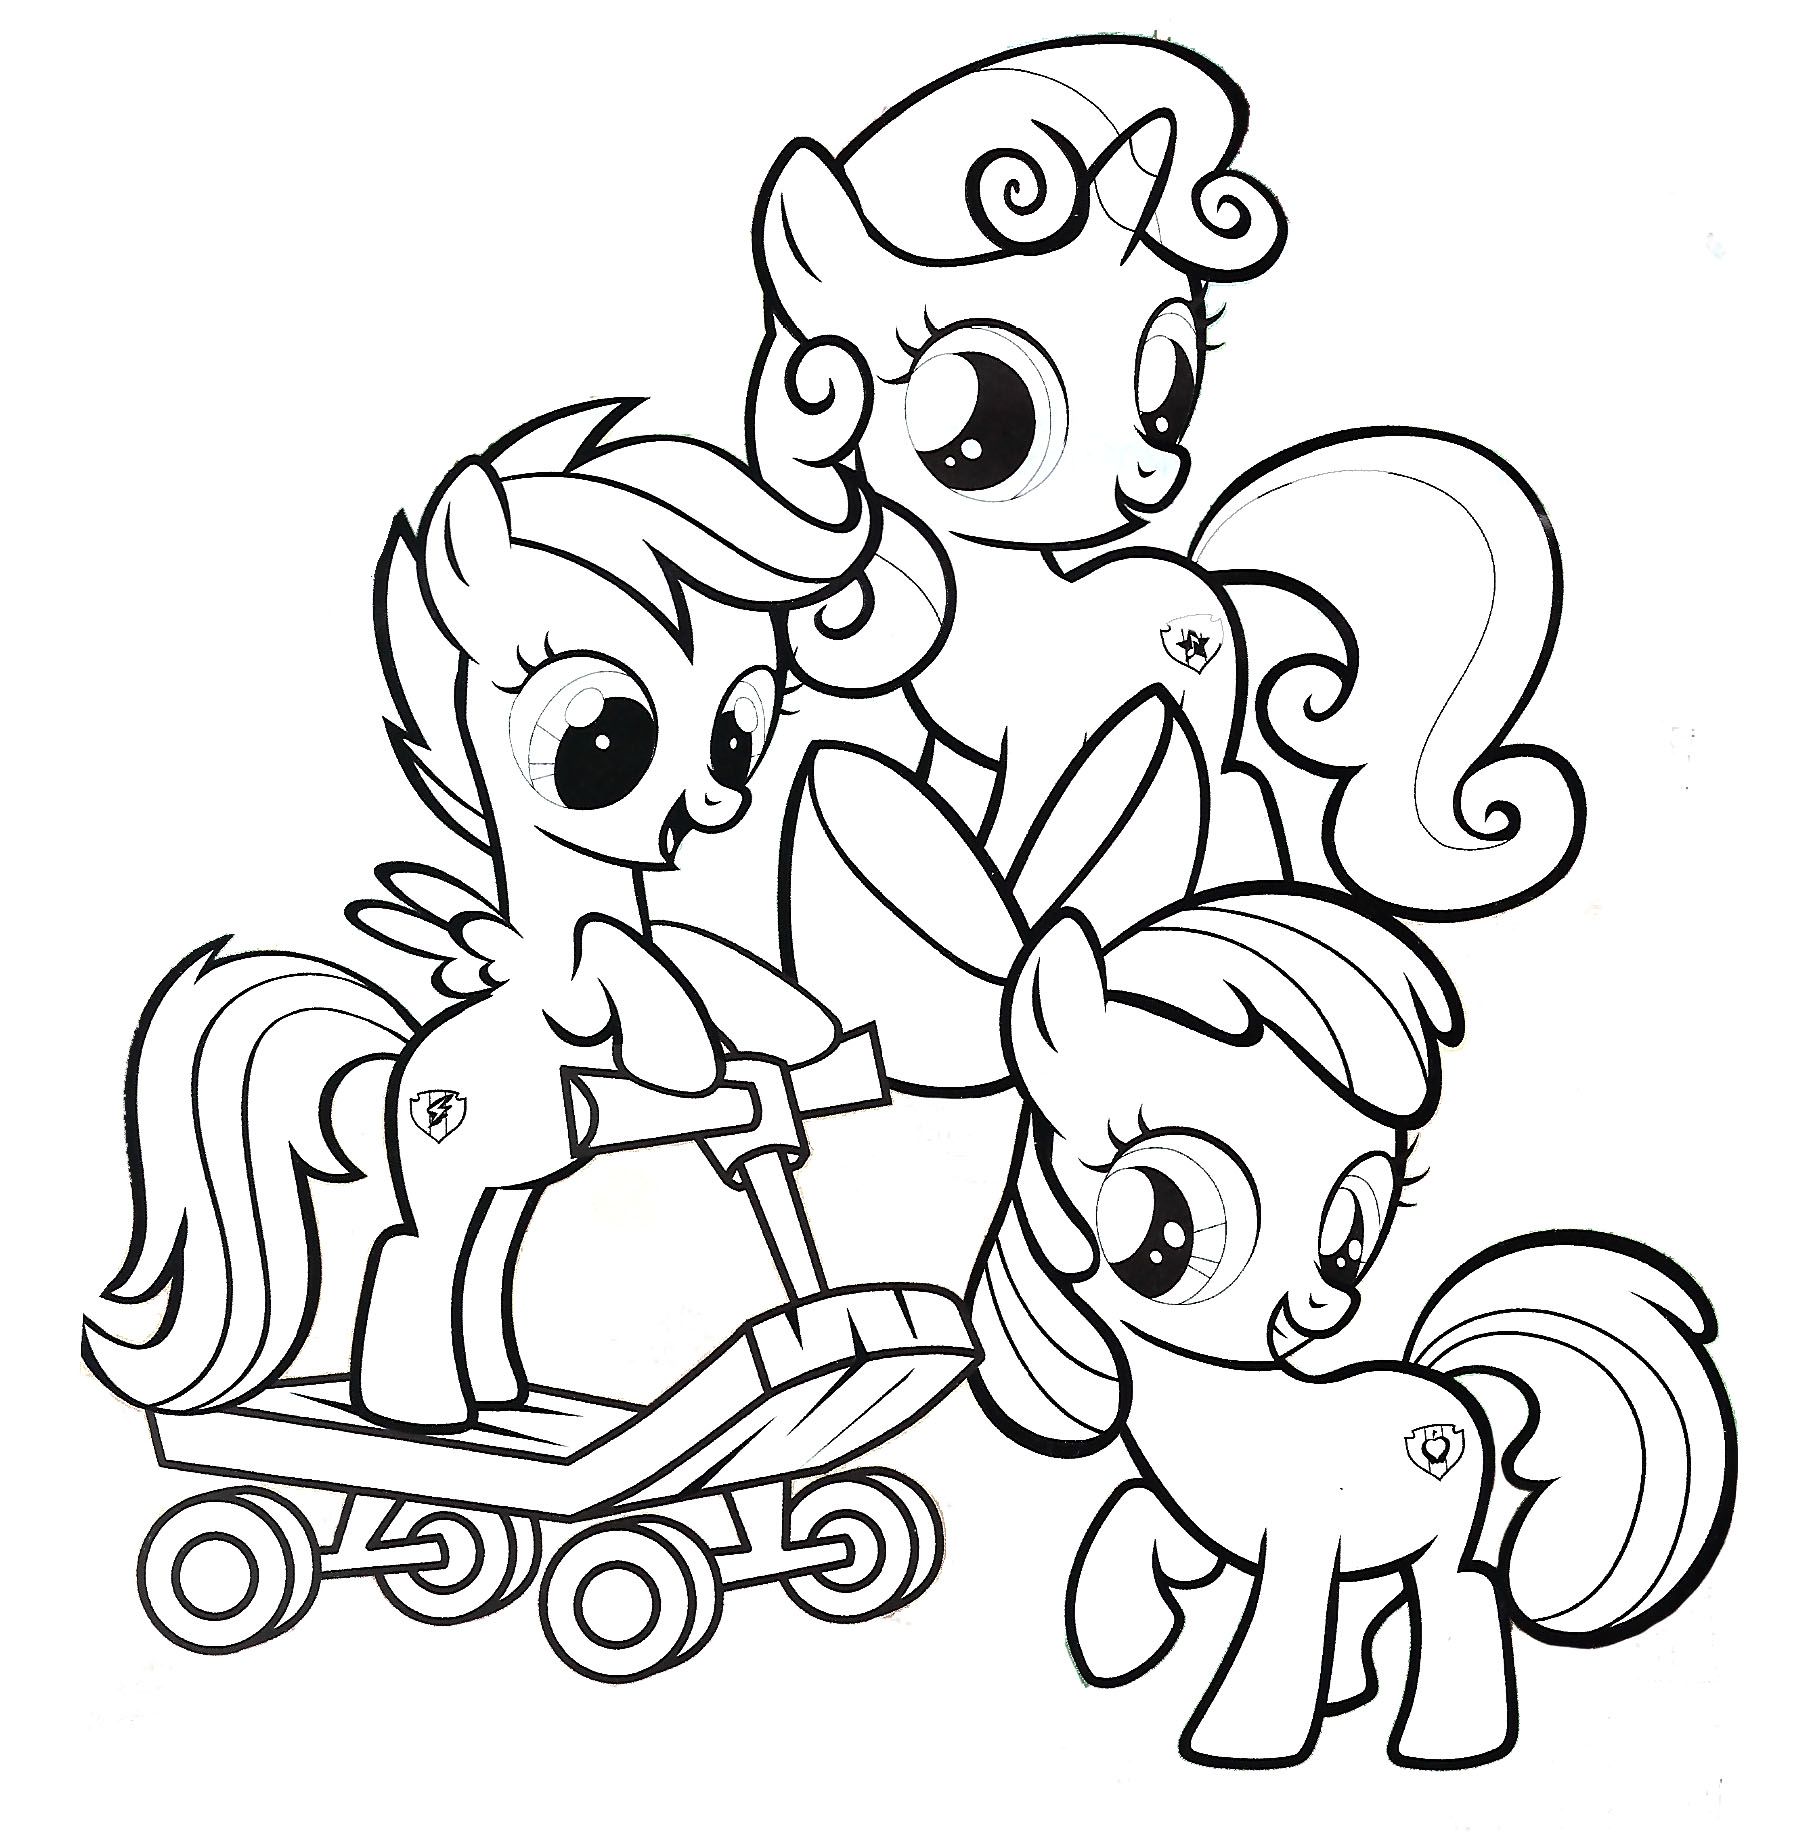 The Three Little Pony coloring book to print and online